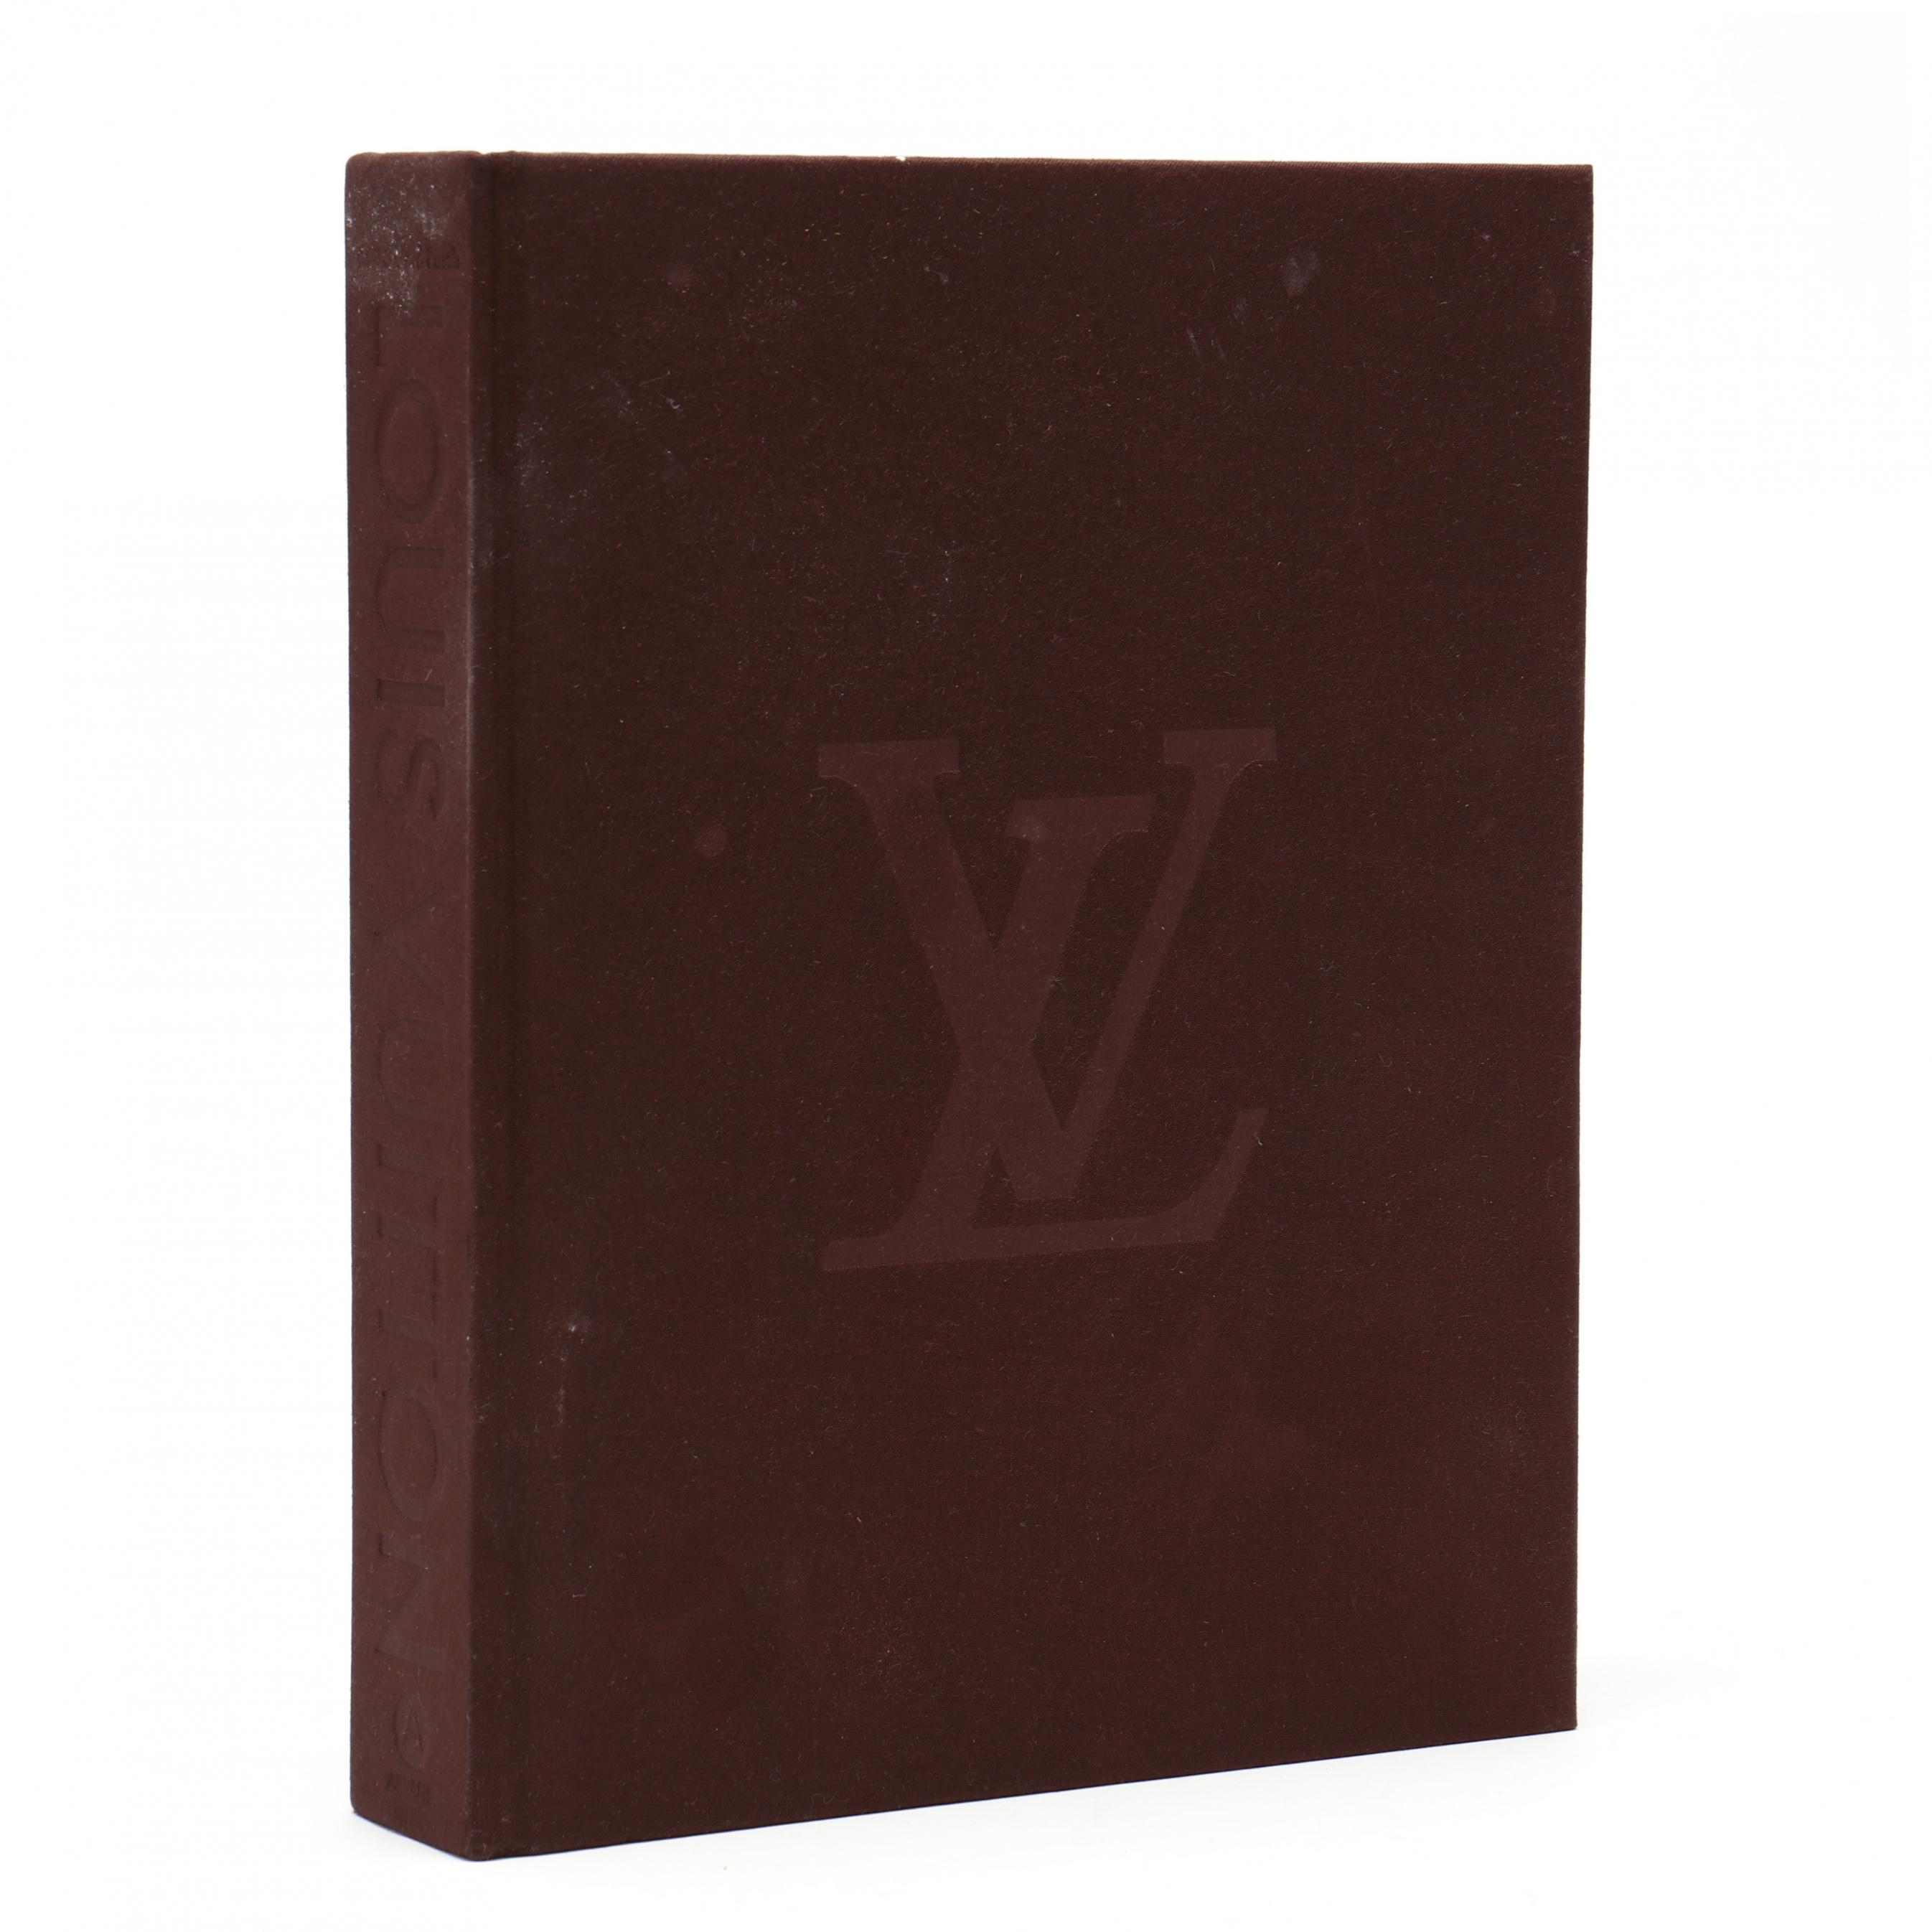 Louis Vuitton The Birth Of Modern Luxury Coffee Table Book (Lot 2088 - The  Collection of Mr. Duggins and Mr. Dunn, High Point, North CarolinaNov 20,  2020, 10:00am)